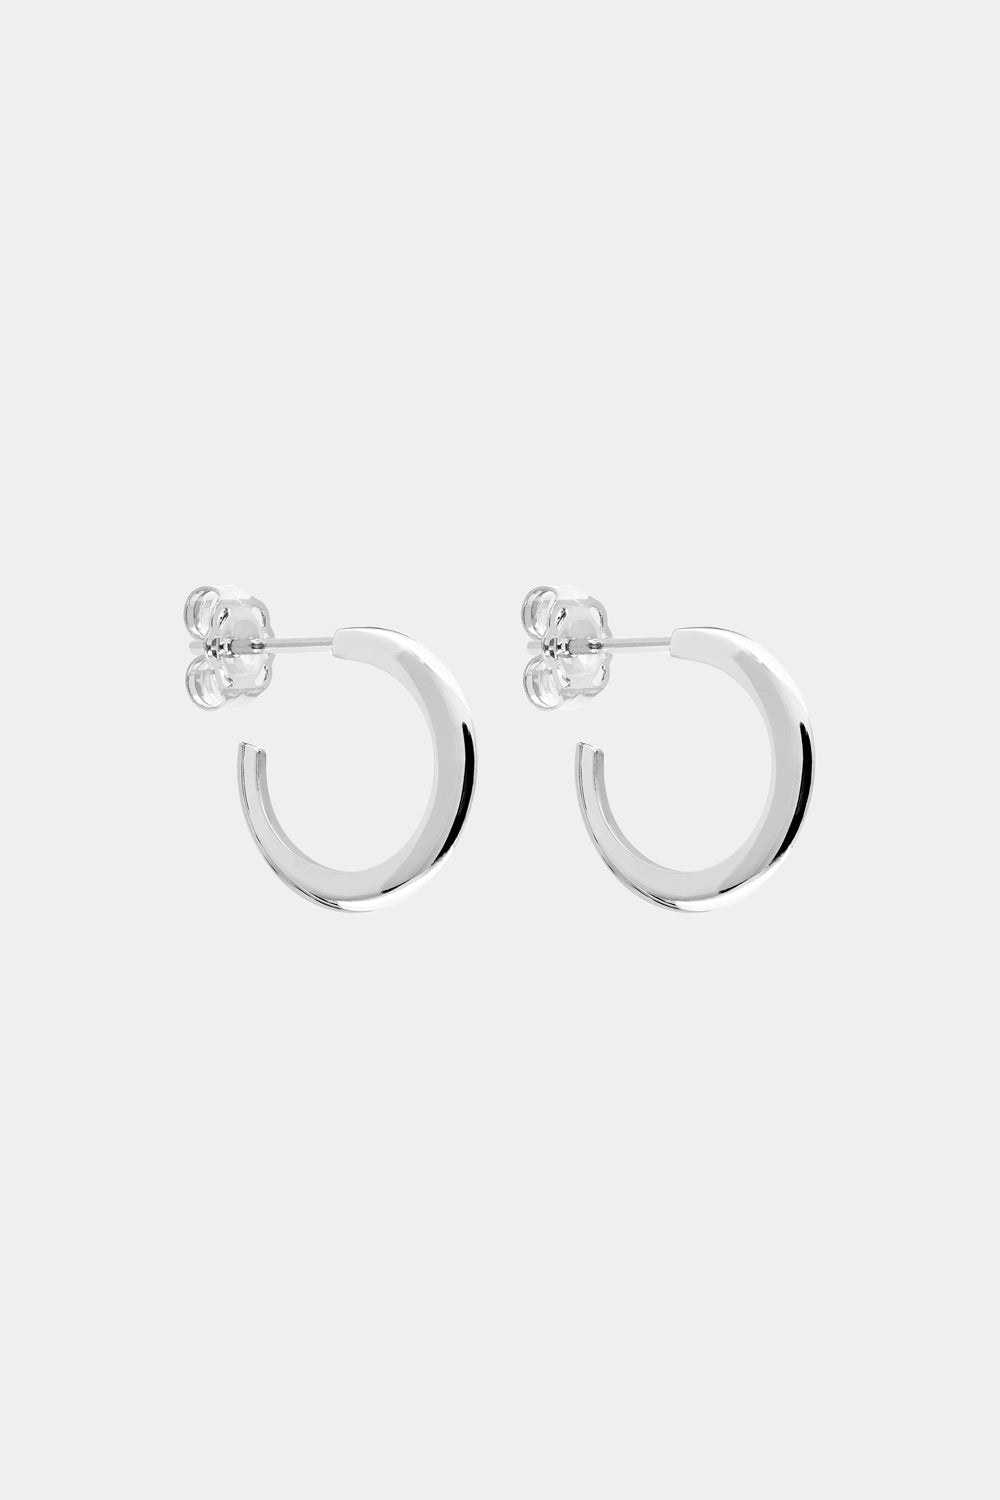 Mini Single Band Hoops | Silver or 9K White Gold, More Options Available